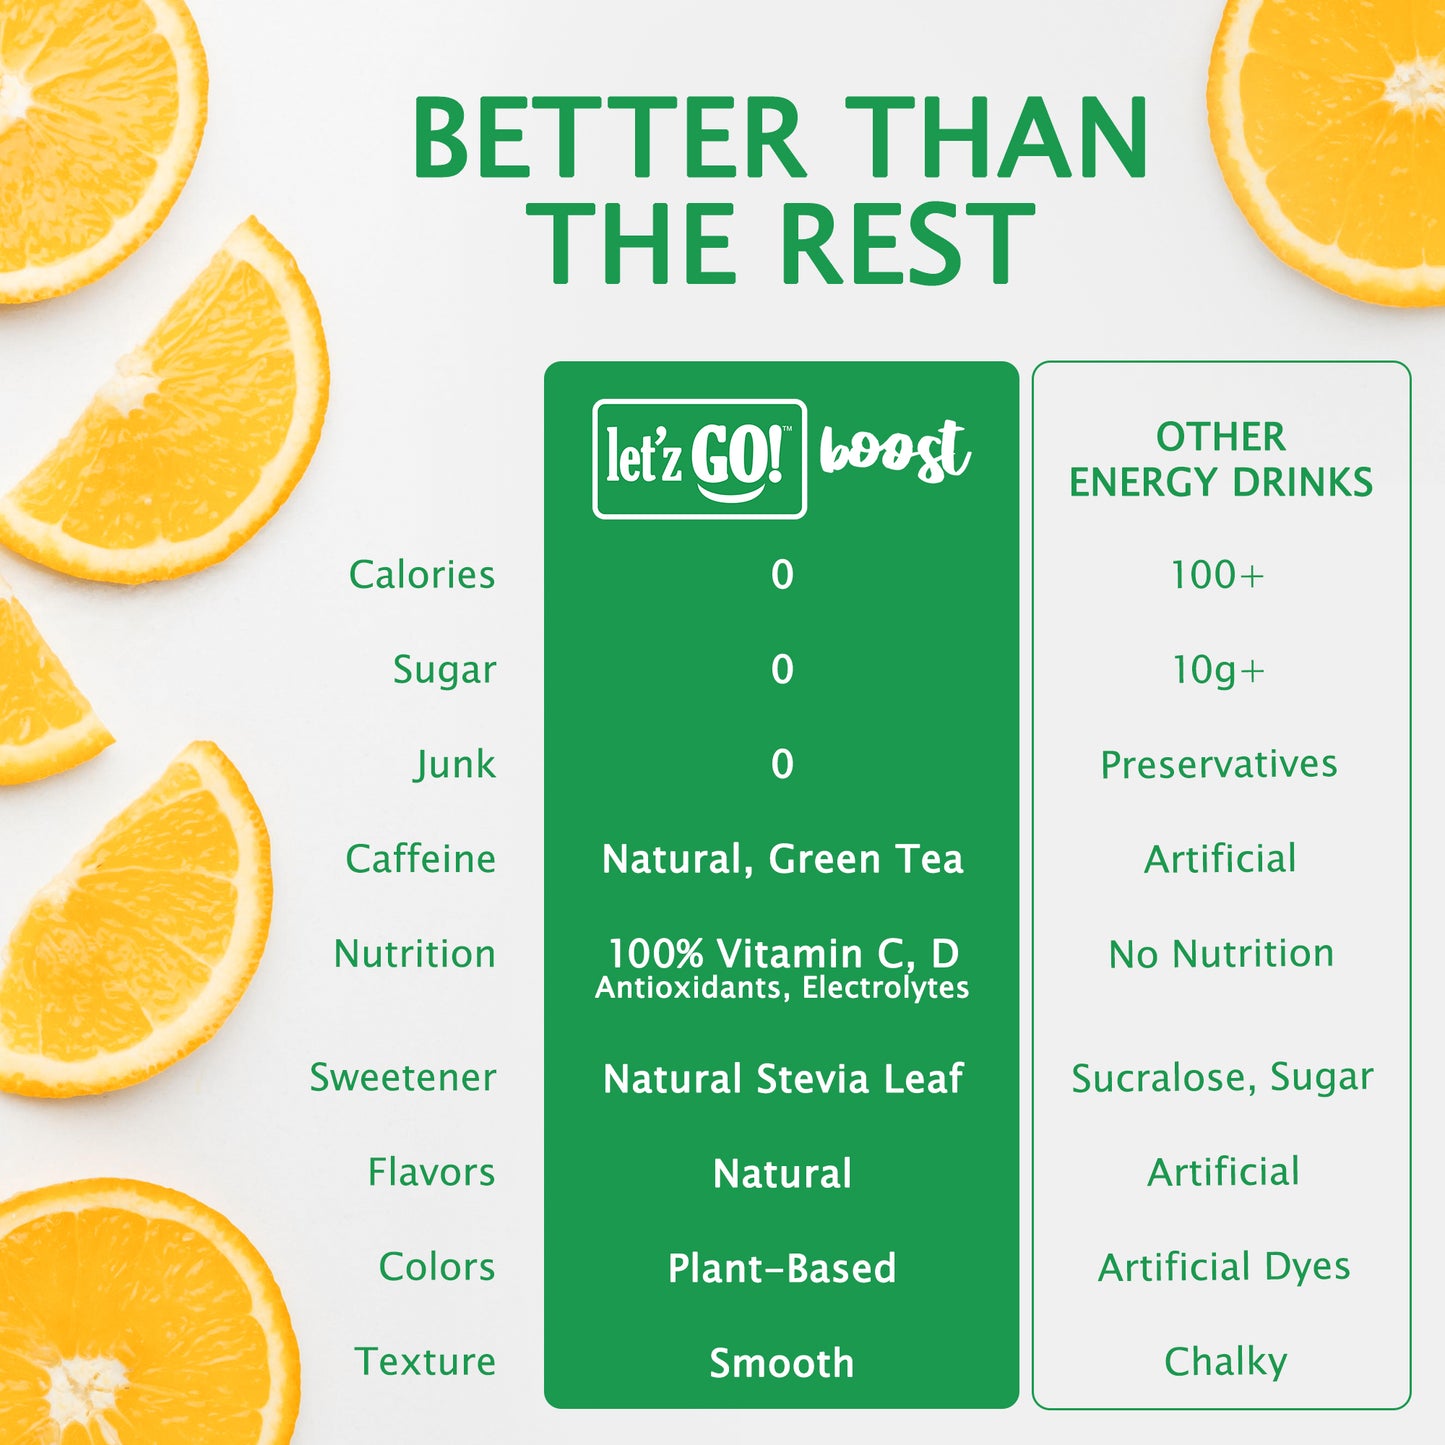 Let'z Go Boost outperforms other energy drinks, with great nutrition and great taste